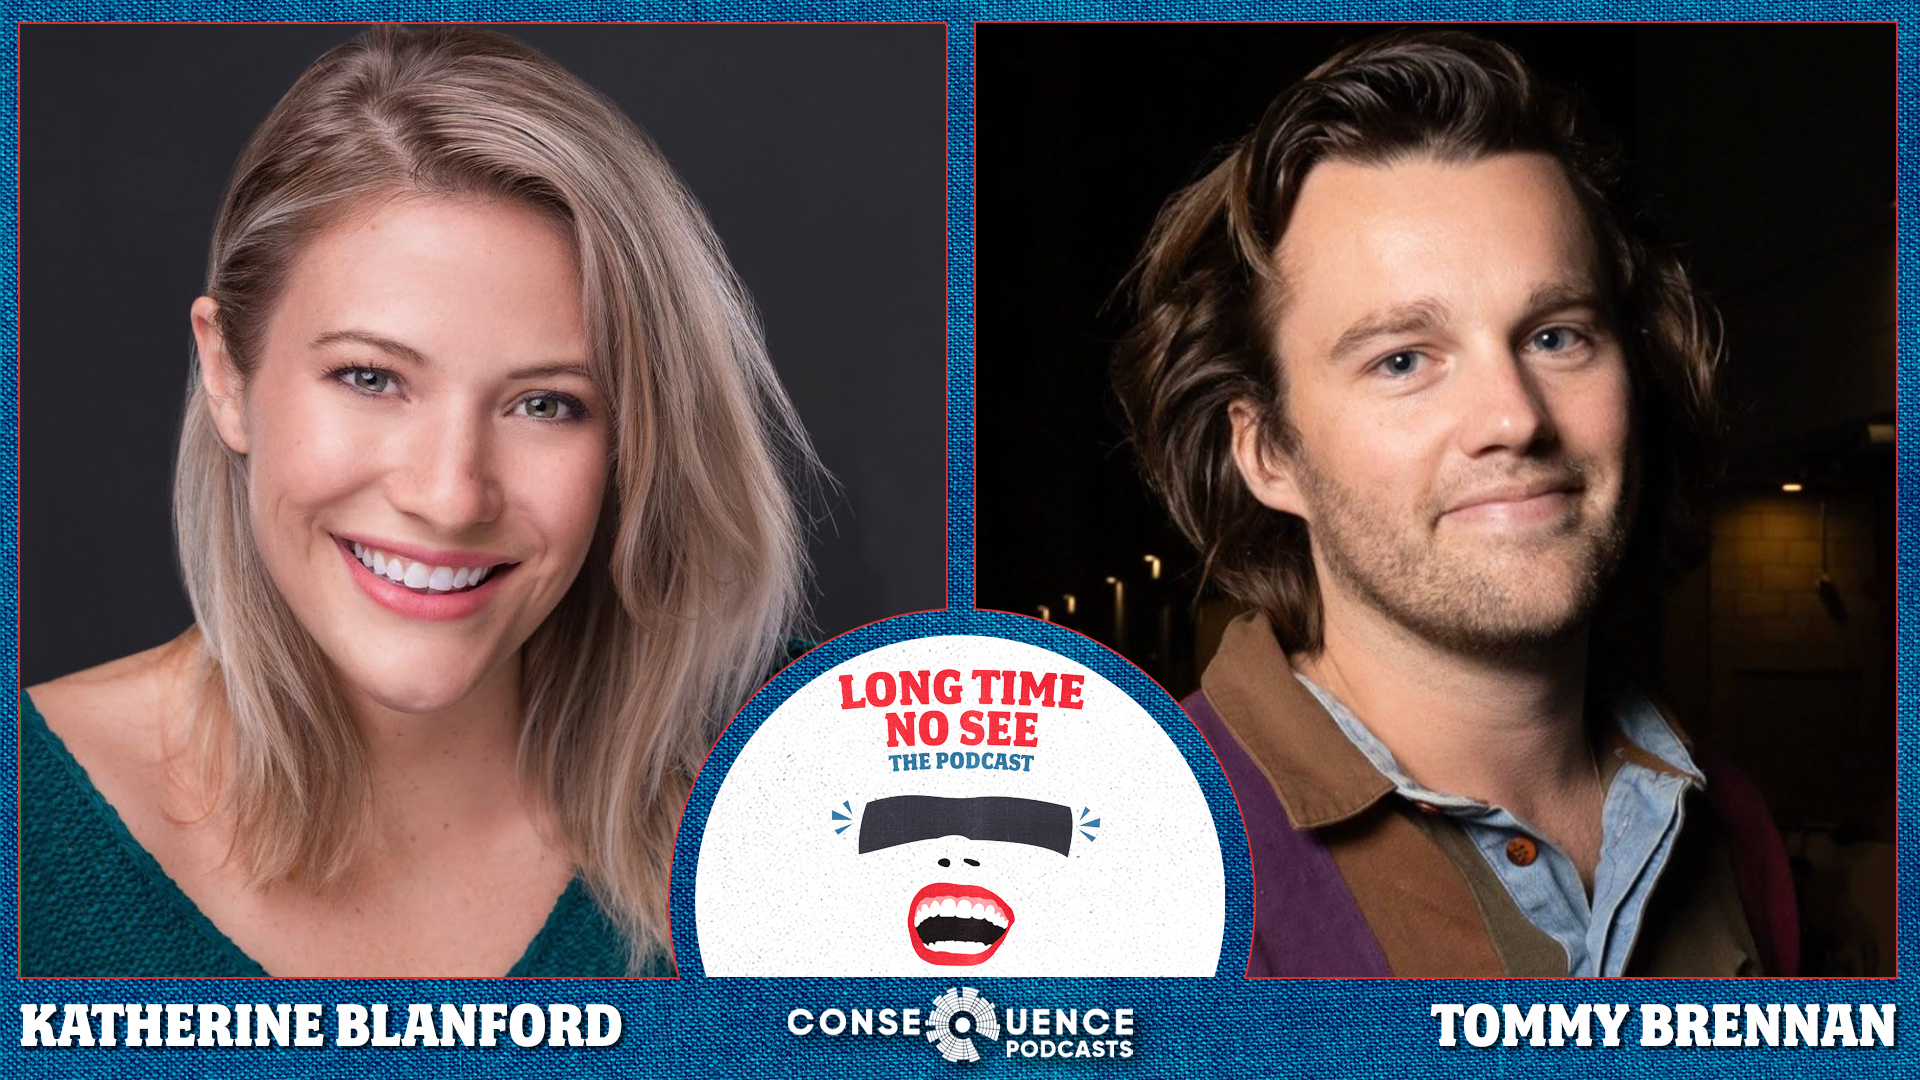 Long Time No See Podcast: Katherine Blanford & Tommy Brennan